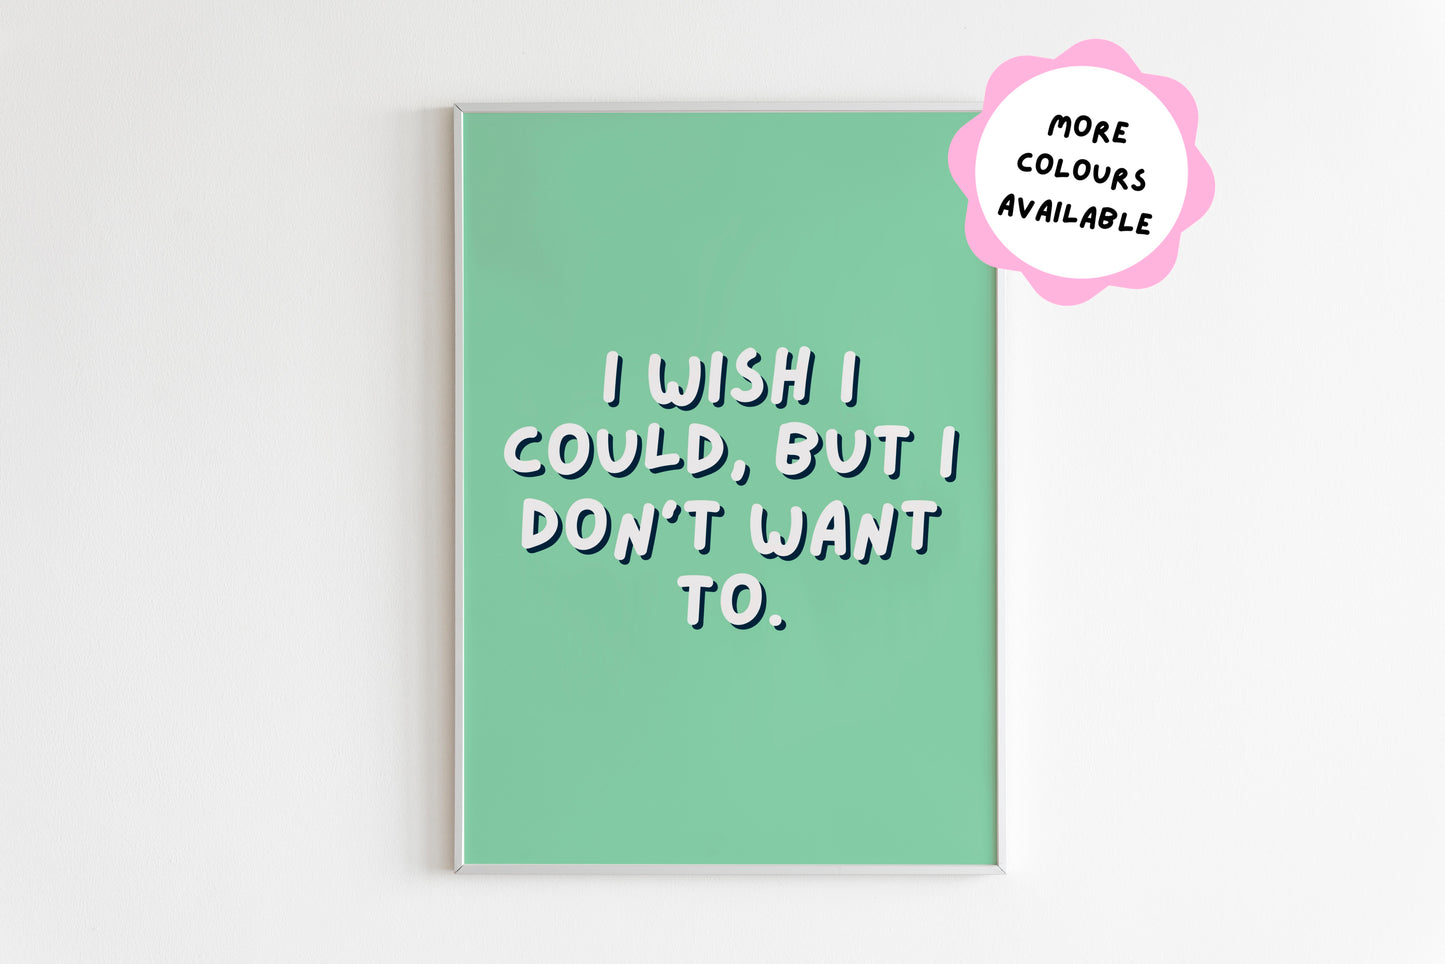 I Wish I Could But I Don’t Want To Quote Print (Phoebe Buffet - Friends)